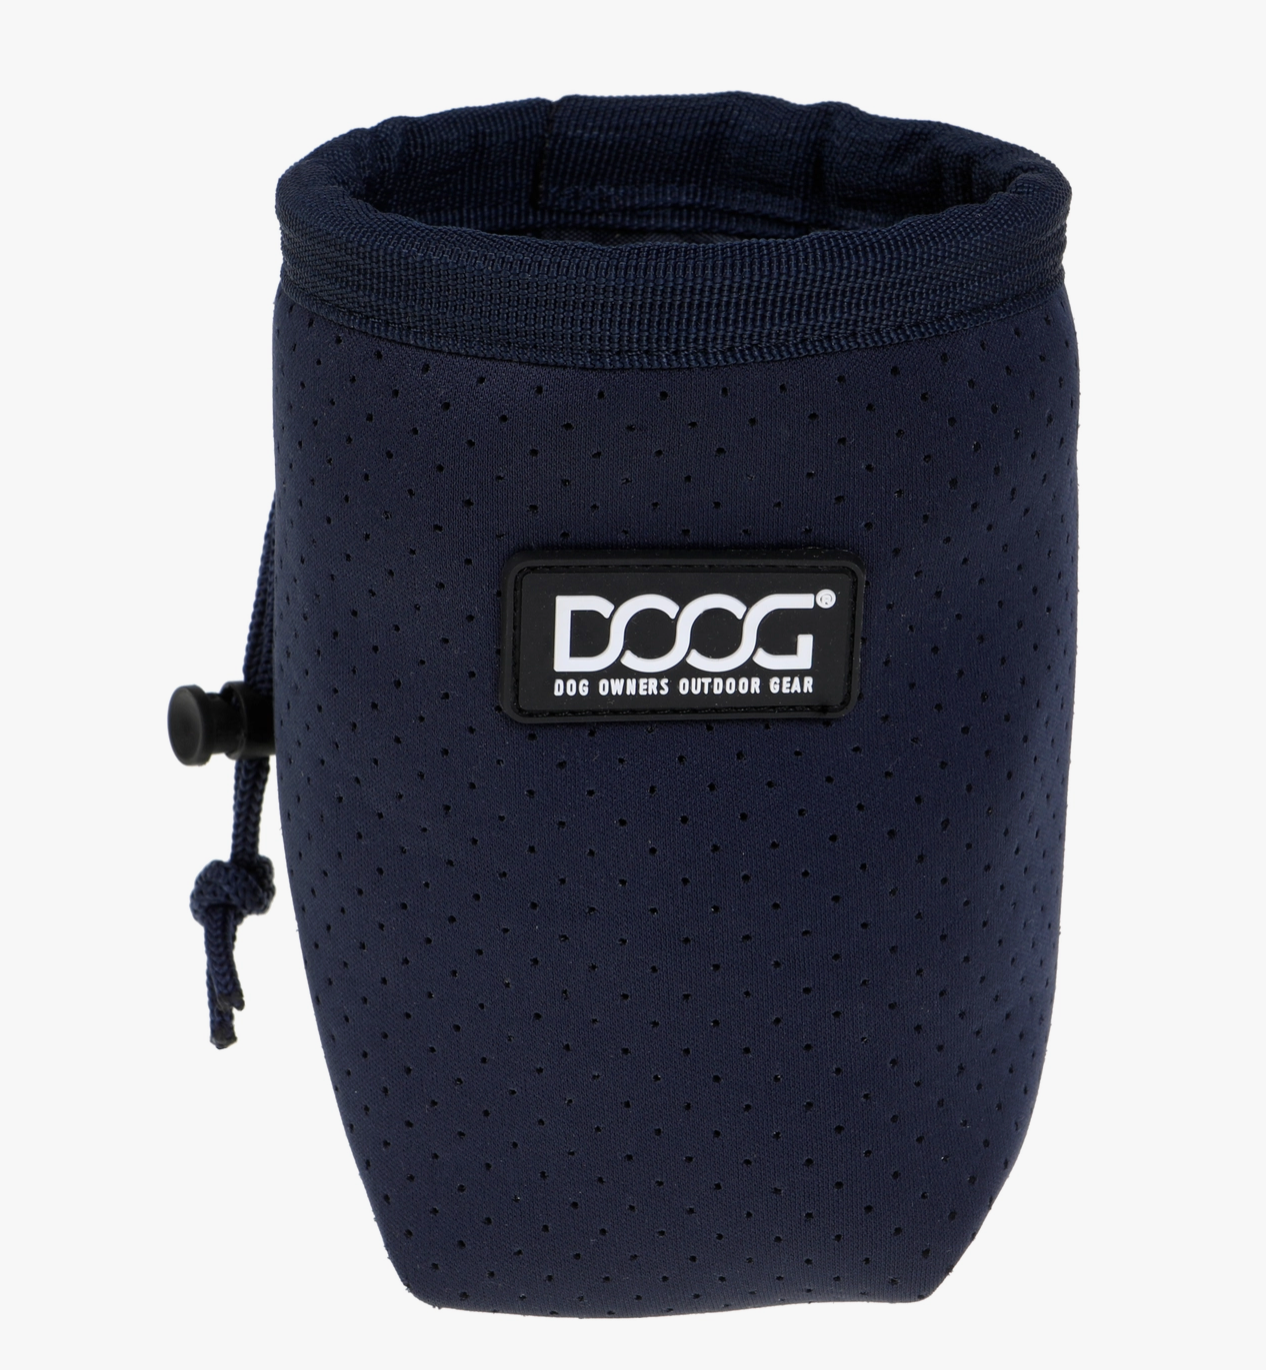 Dog Owners Outdoor Gear Neosport Dog Treat & Training Pouch (Small) - Navy Blue